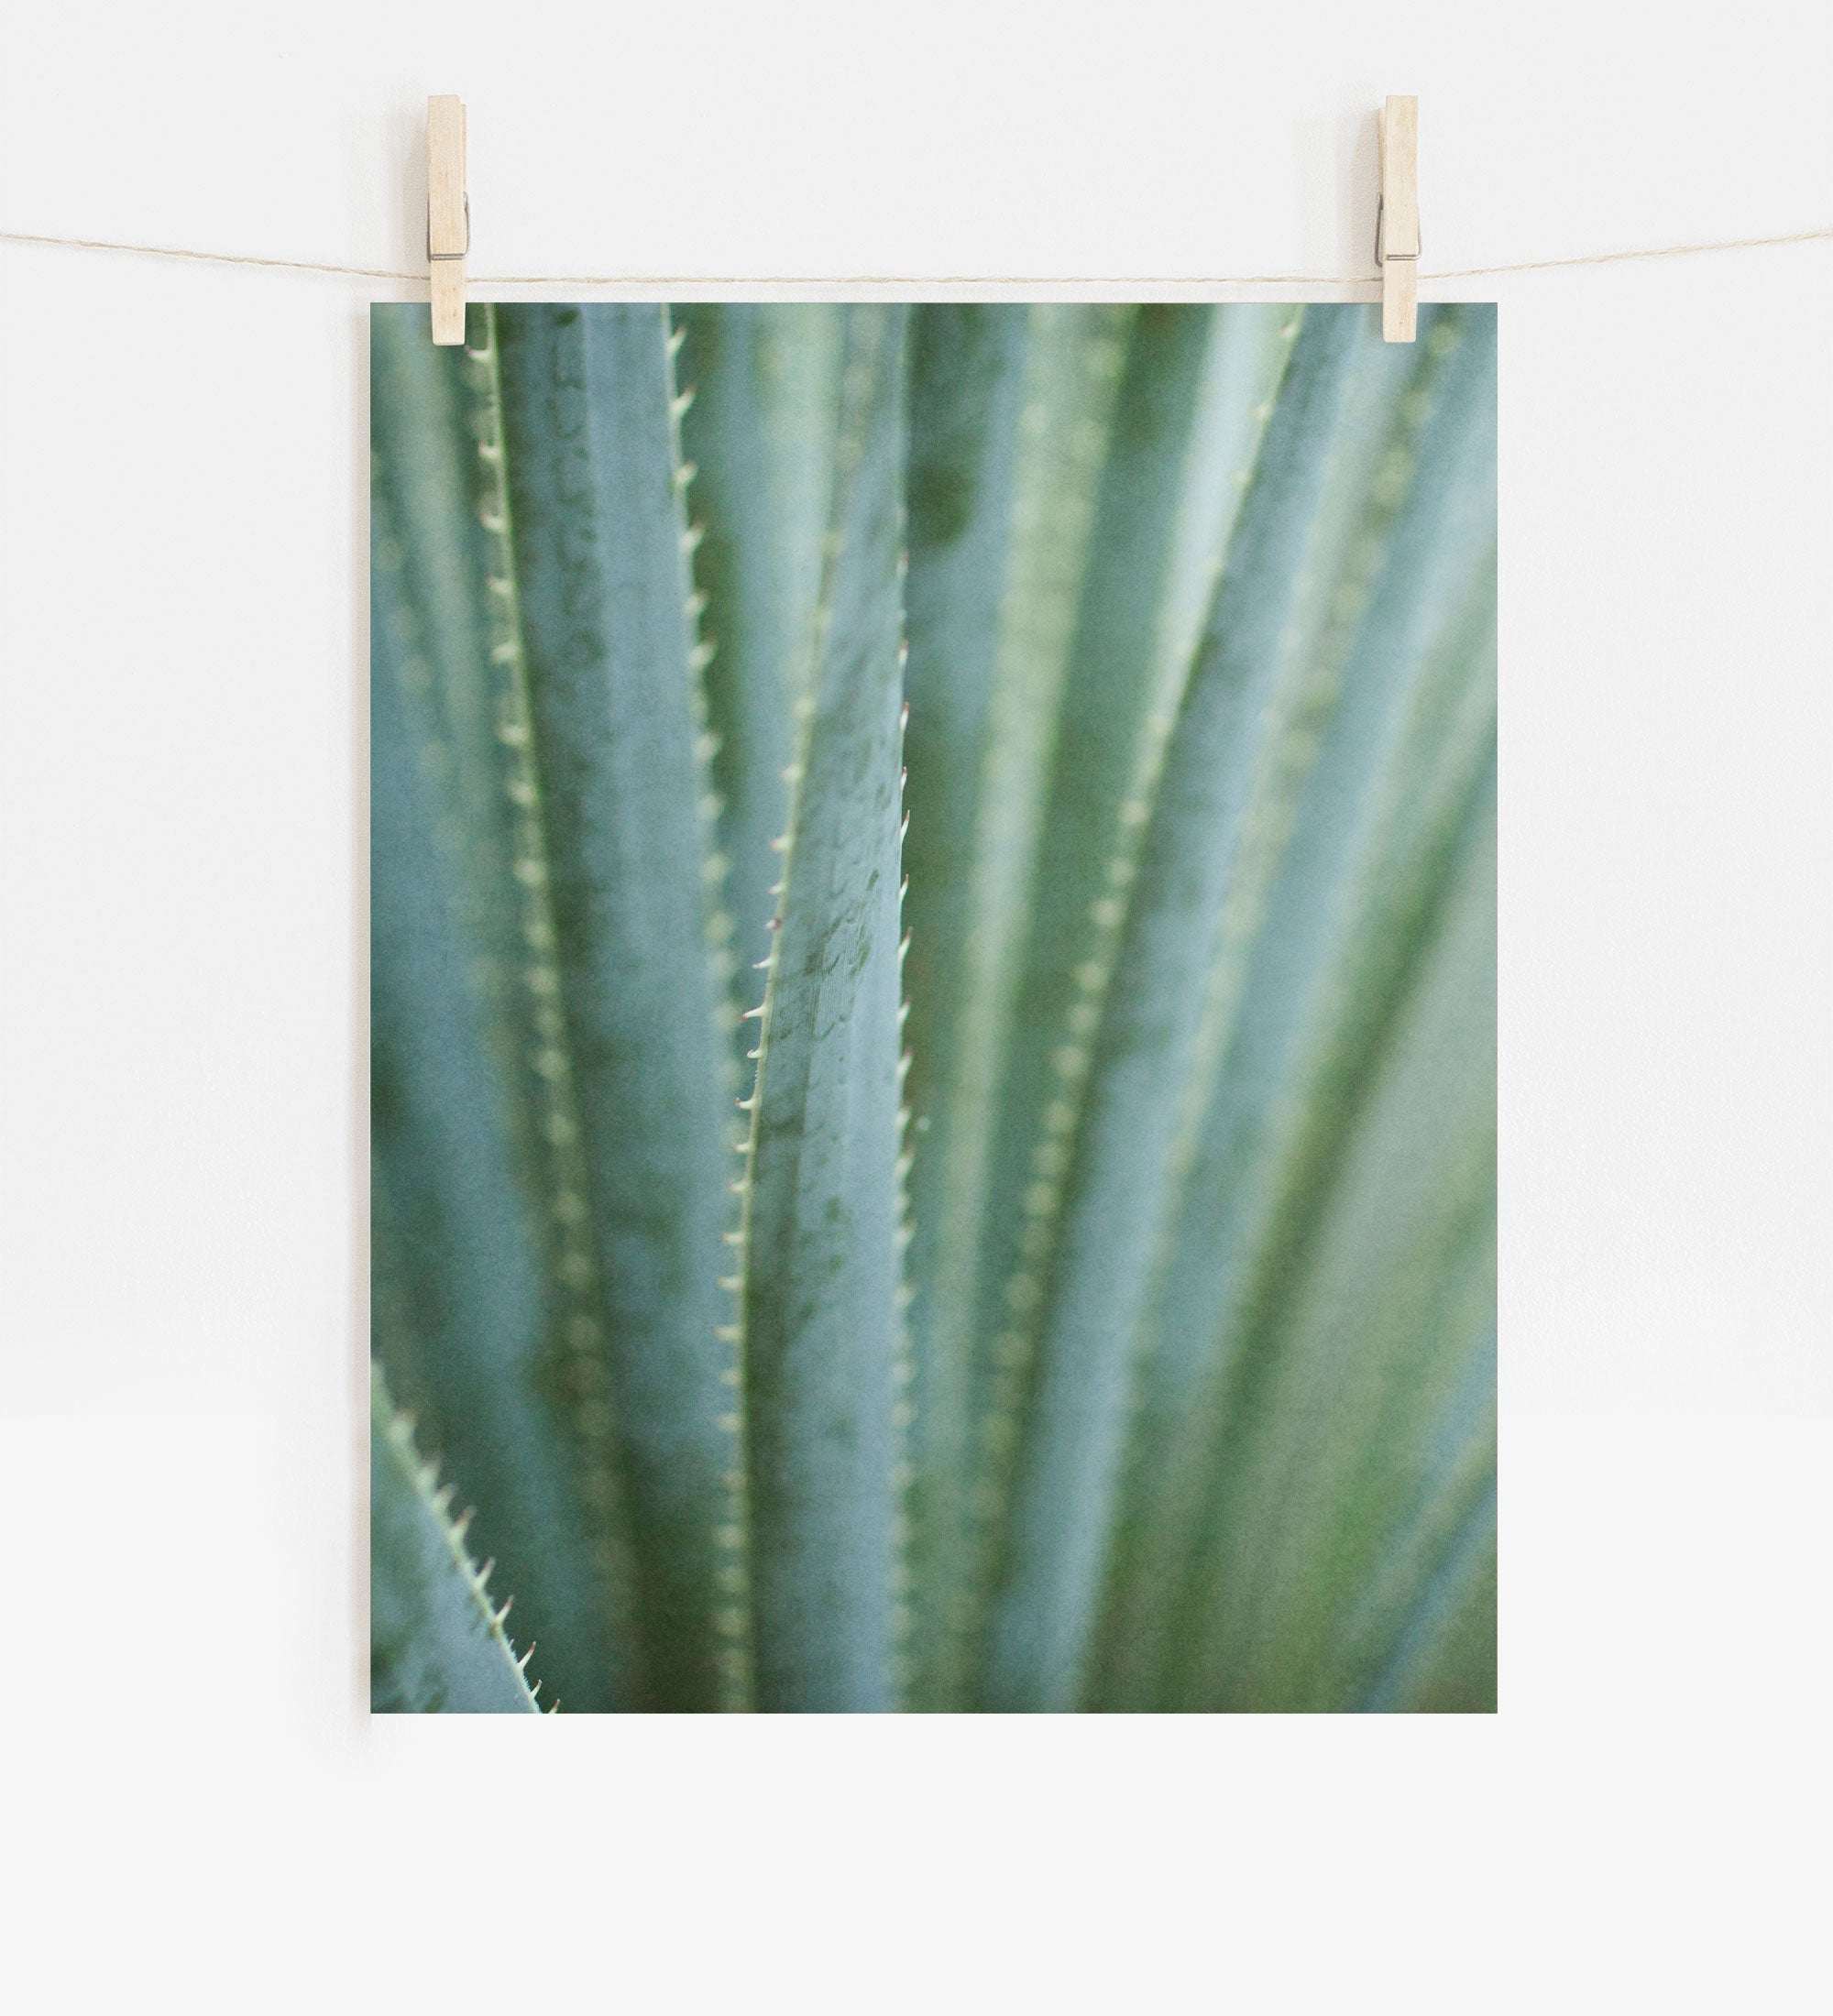 A close-up photo of a green aloe vera plant&#39;s leaves with spiky edges, printed on archival photographic paper and displayed as an unframed print hanging from a wooden clothespin on a Offley Green Green Botanical Print, &#39;Strands and Spikes II&#39;.